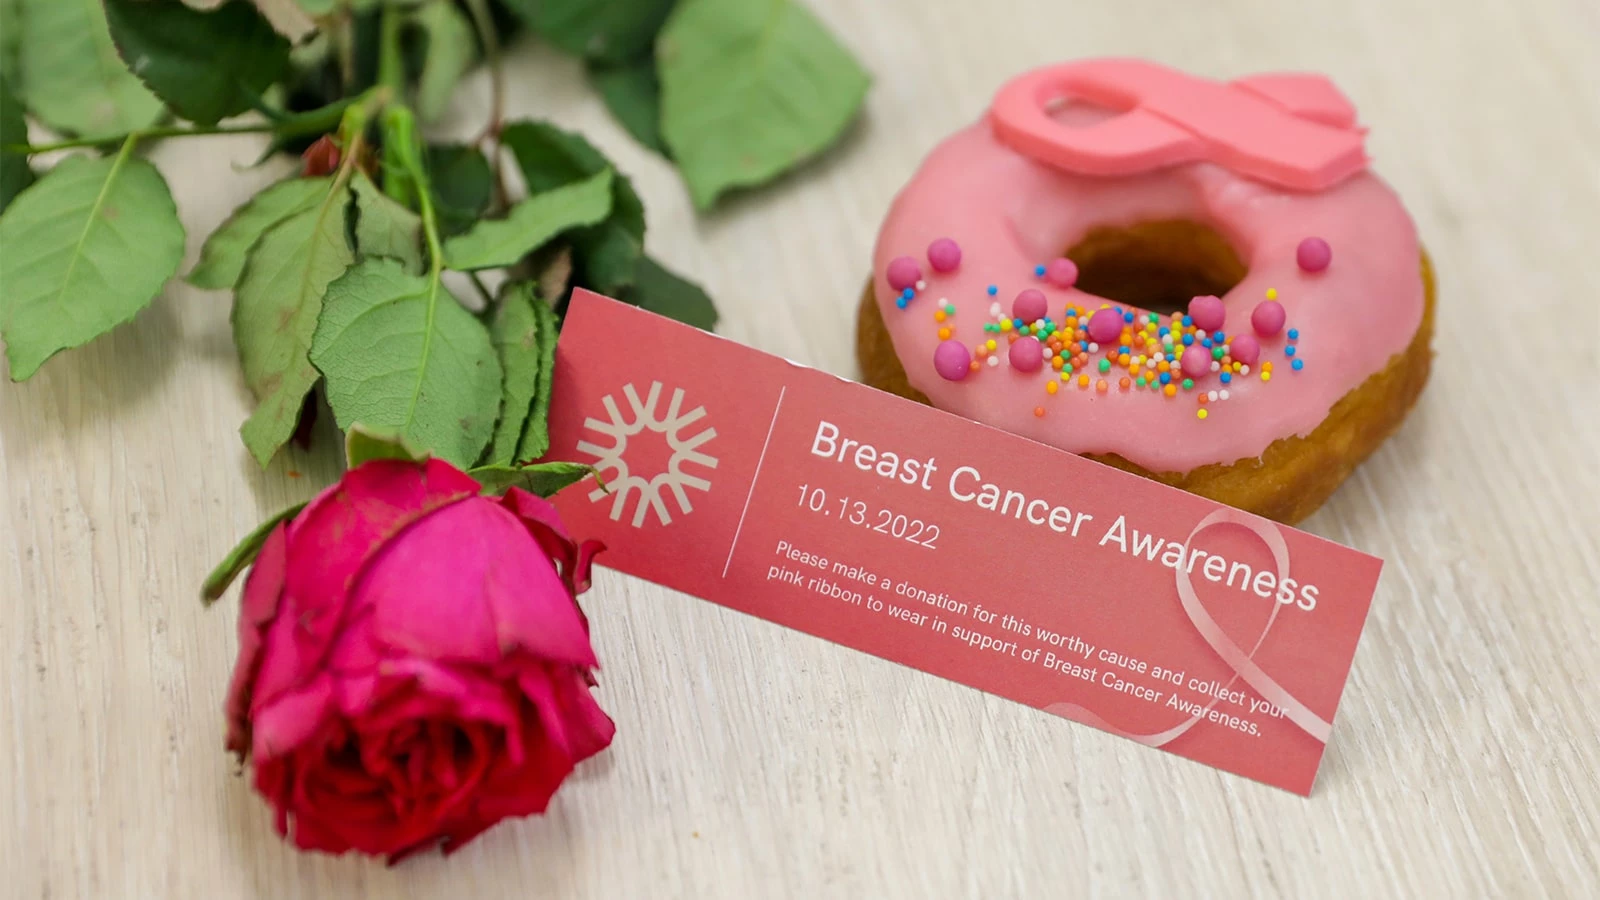 Unique Properties supports breast cancer awareness month